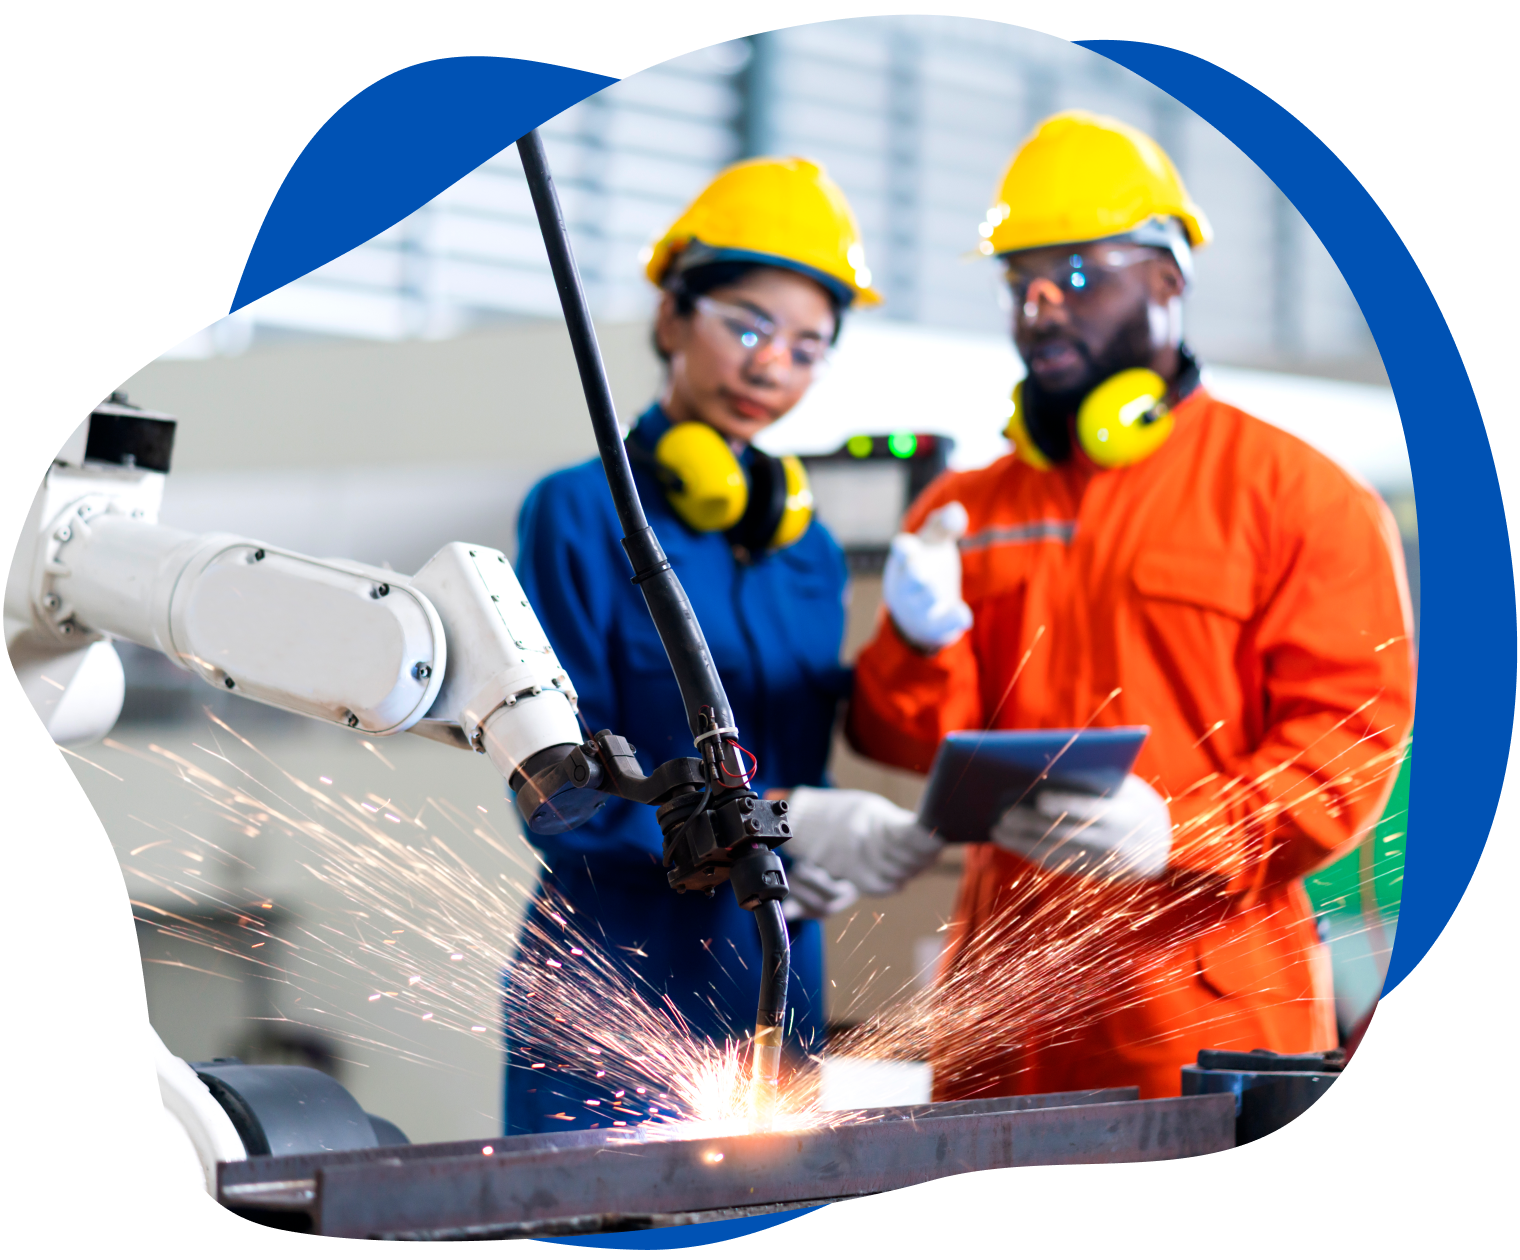 Industrial LMS for Manufacturing Training